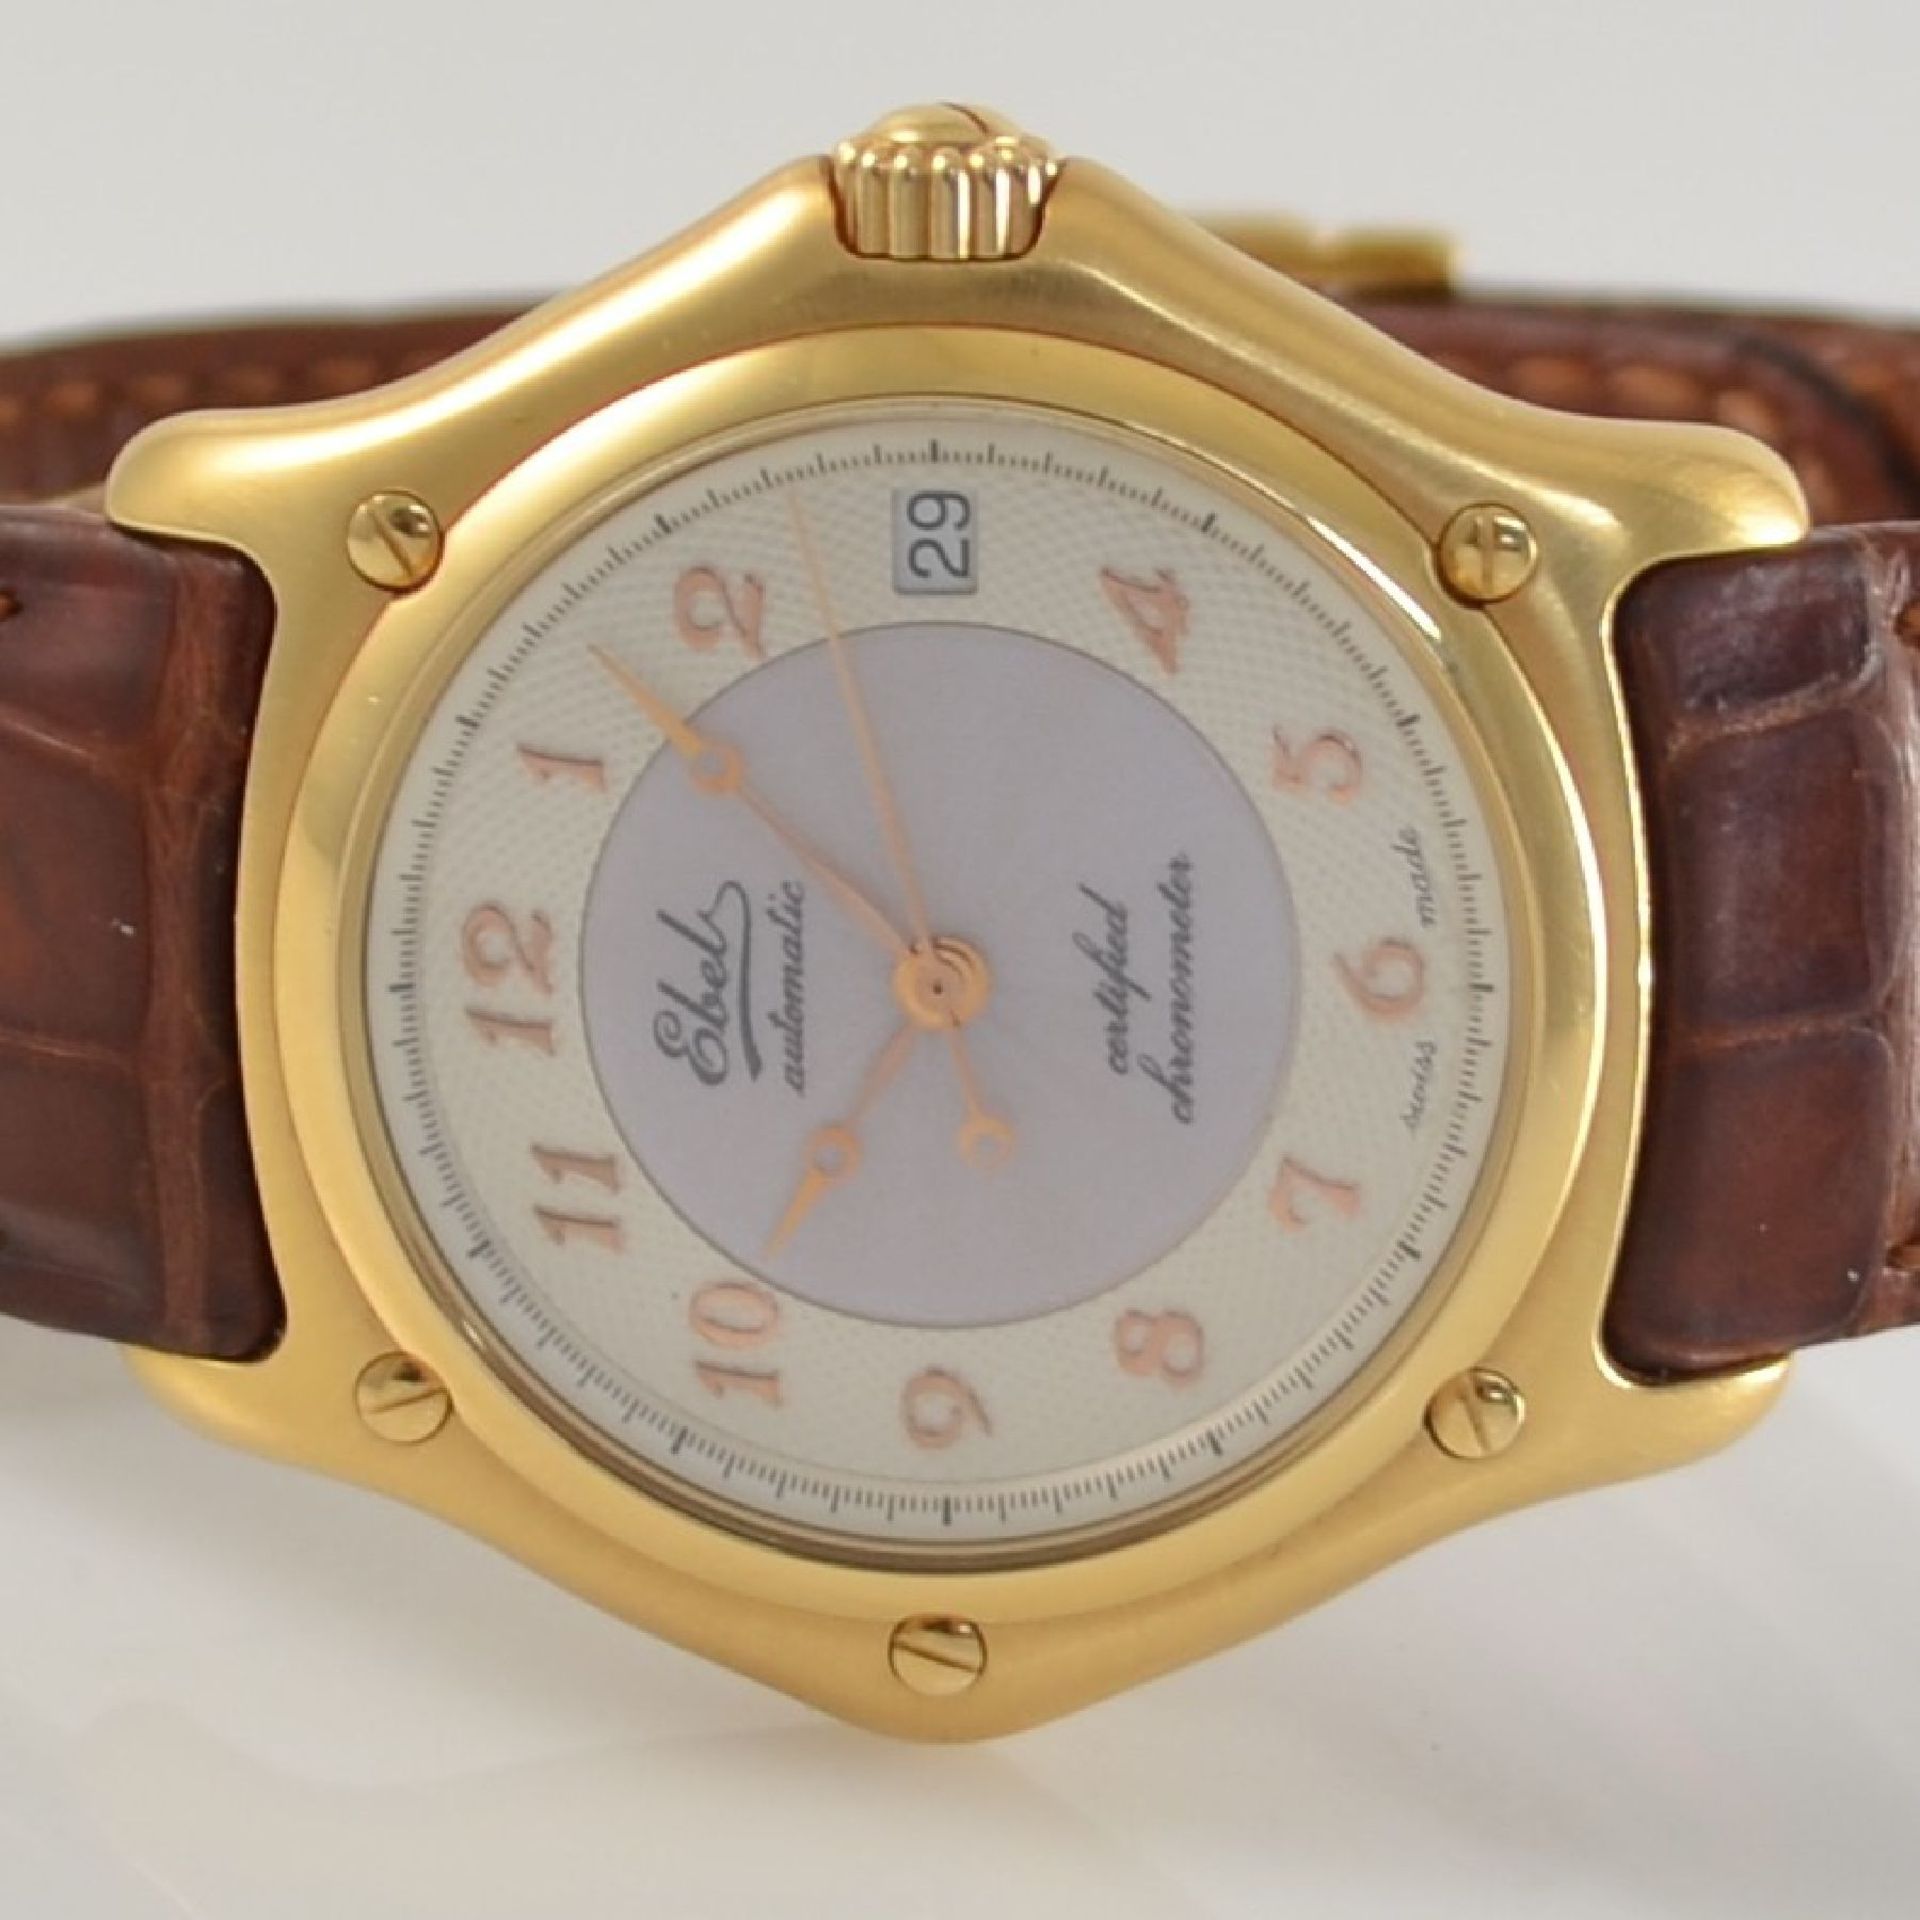 EBEL rare 18k pink gold gents wristwatch series 1911, self winding, chronometer made in a limited - Bild 2 aus 6